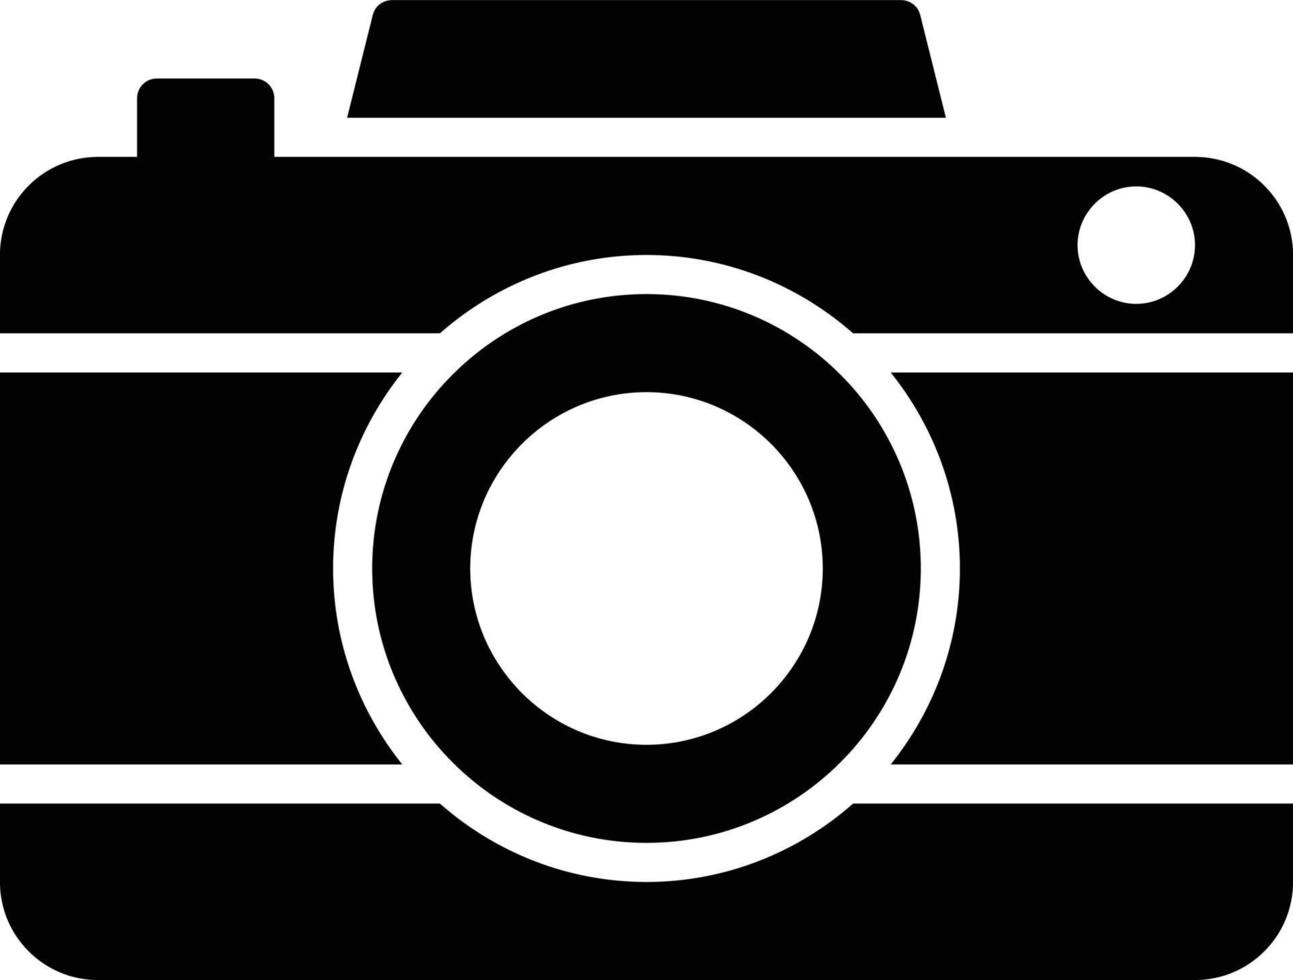 Camera vector illustration on a background.Premium quality symbols.vector icons for concept and graphic design.